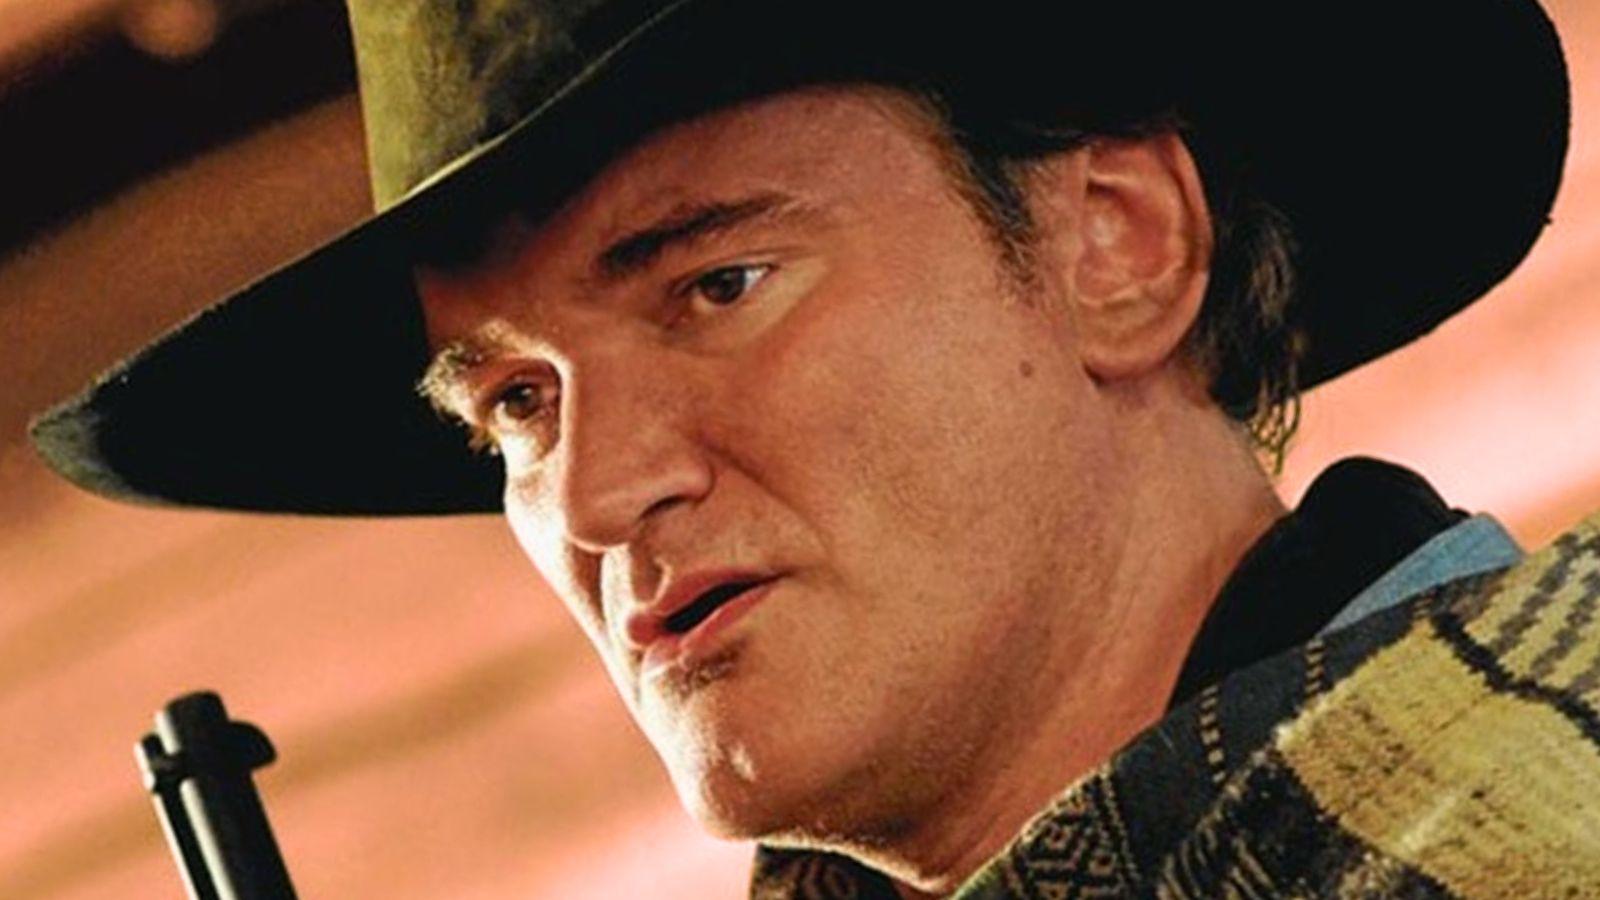 Quentin Tarantino's cameo in The Hateful Eight.